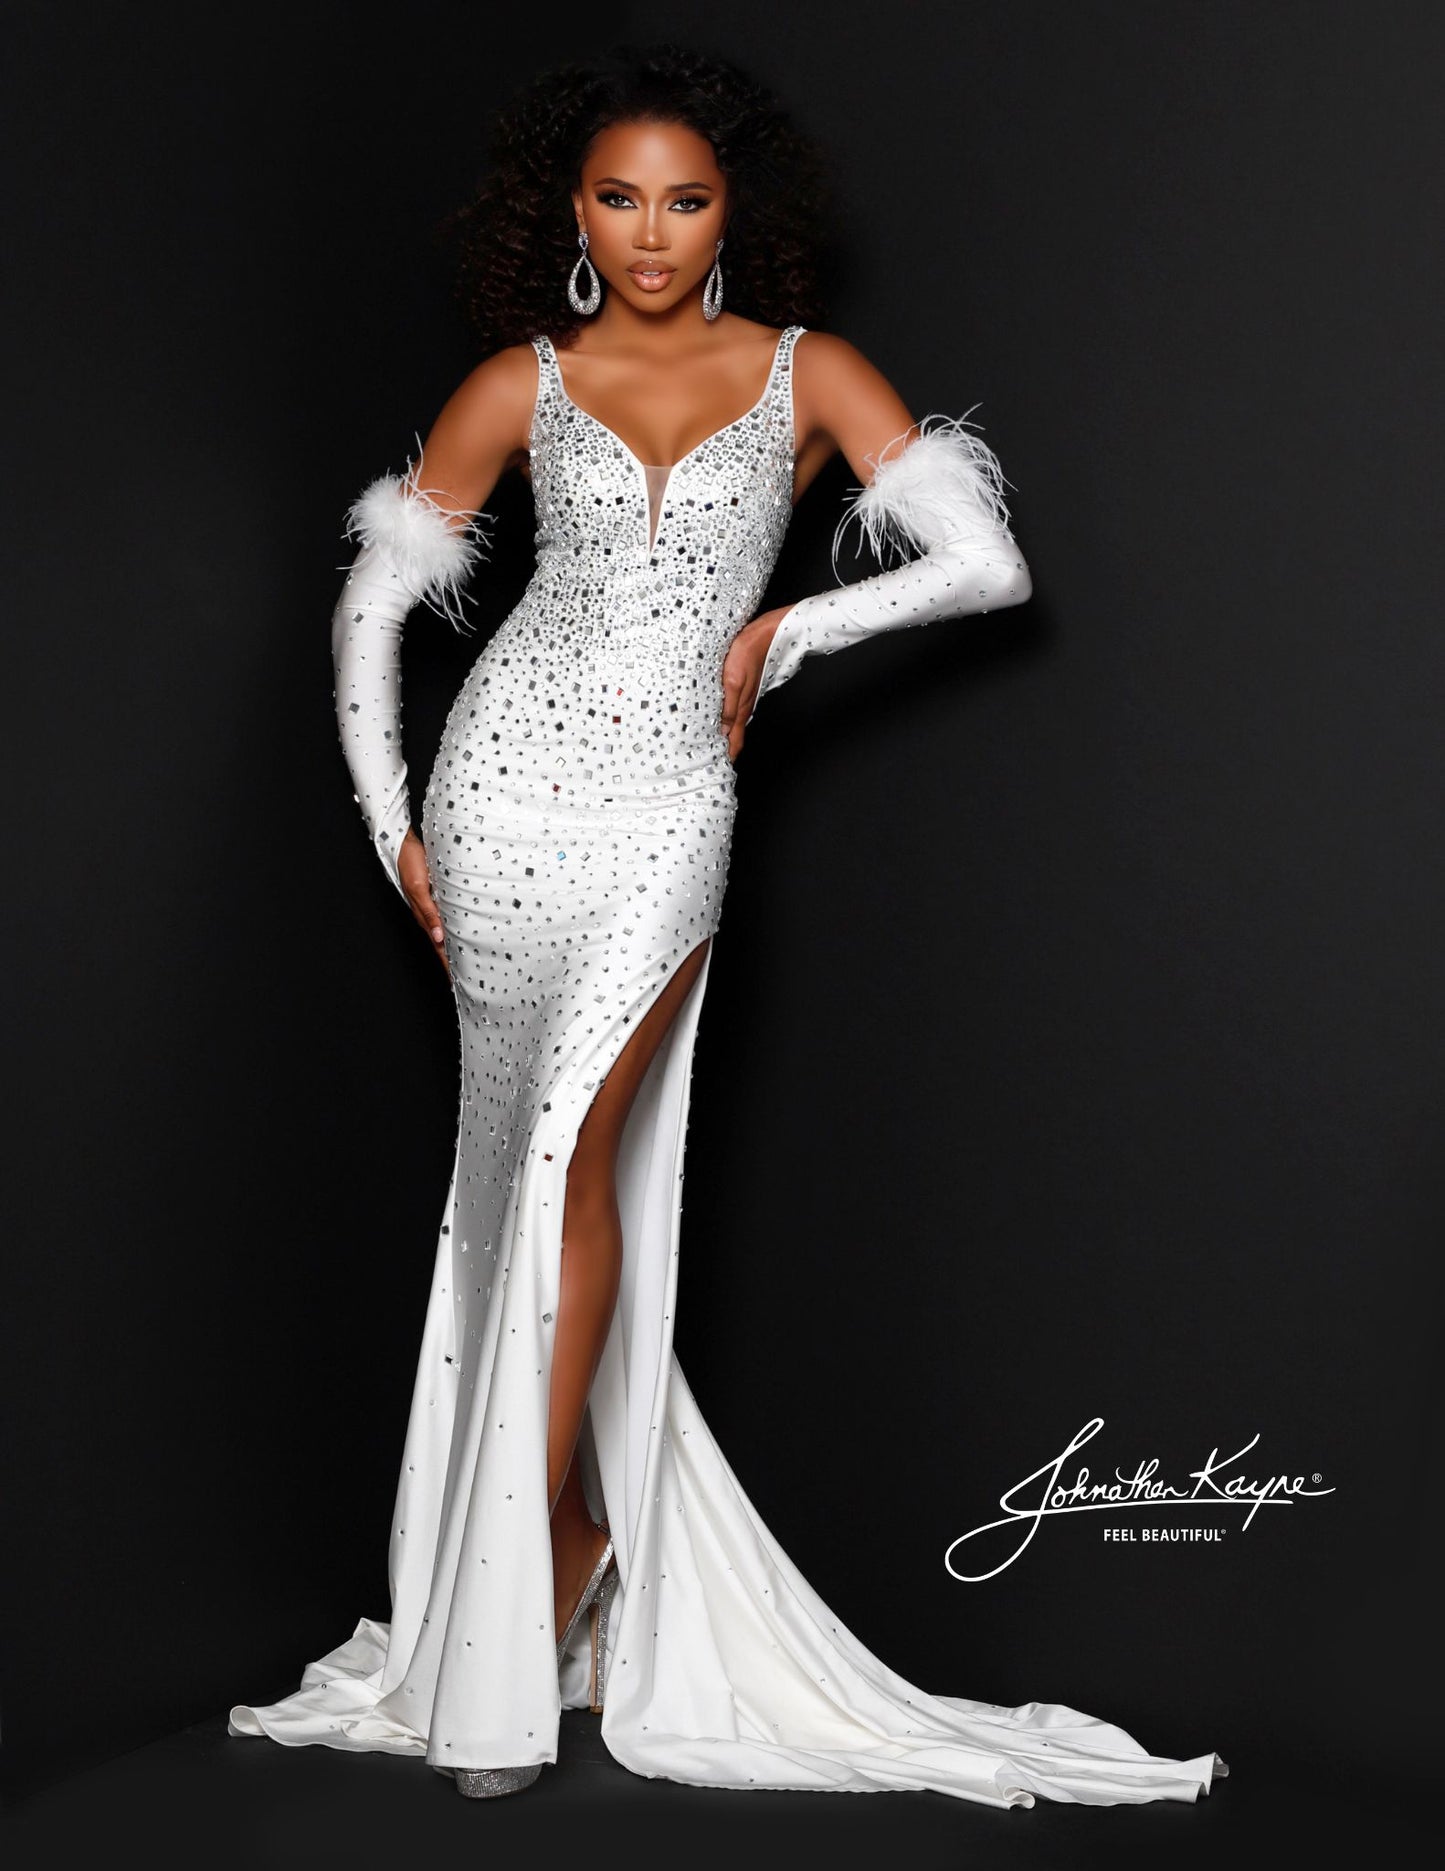 Be dazzling in this Johnathan Kayne 2720 evening gown. Its sleek crystal jersey bodice, Feathered trimmed glove sleeves, and graceful jersey skirt with a high slit create a silhouette that will turn heads wherever you go. Make your mark with this unforgettable style.   Sizes: 00,0,2,4,6,8,10,12,14,16  Colors: Black, Silver, Red, White , Royal